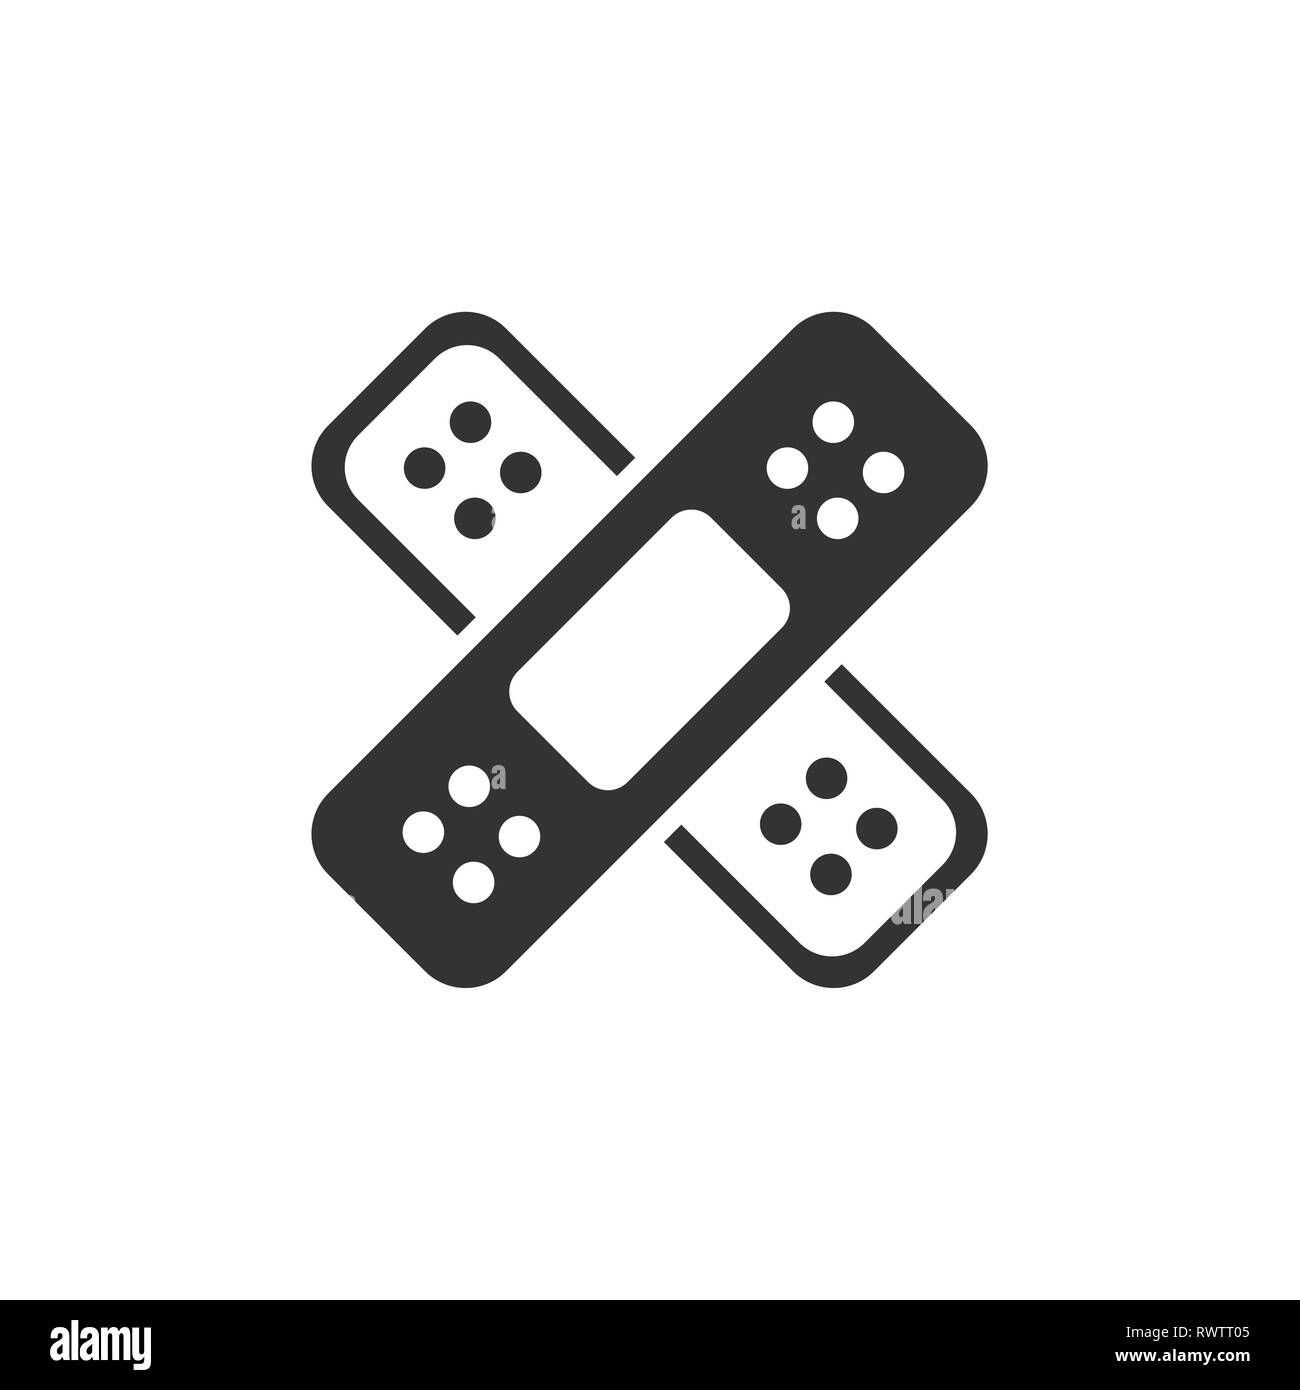 Band aid icon. Medicine care. Isolated vector illustration Stock Vector